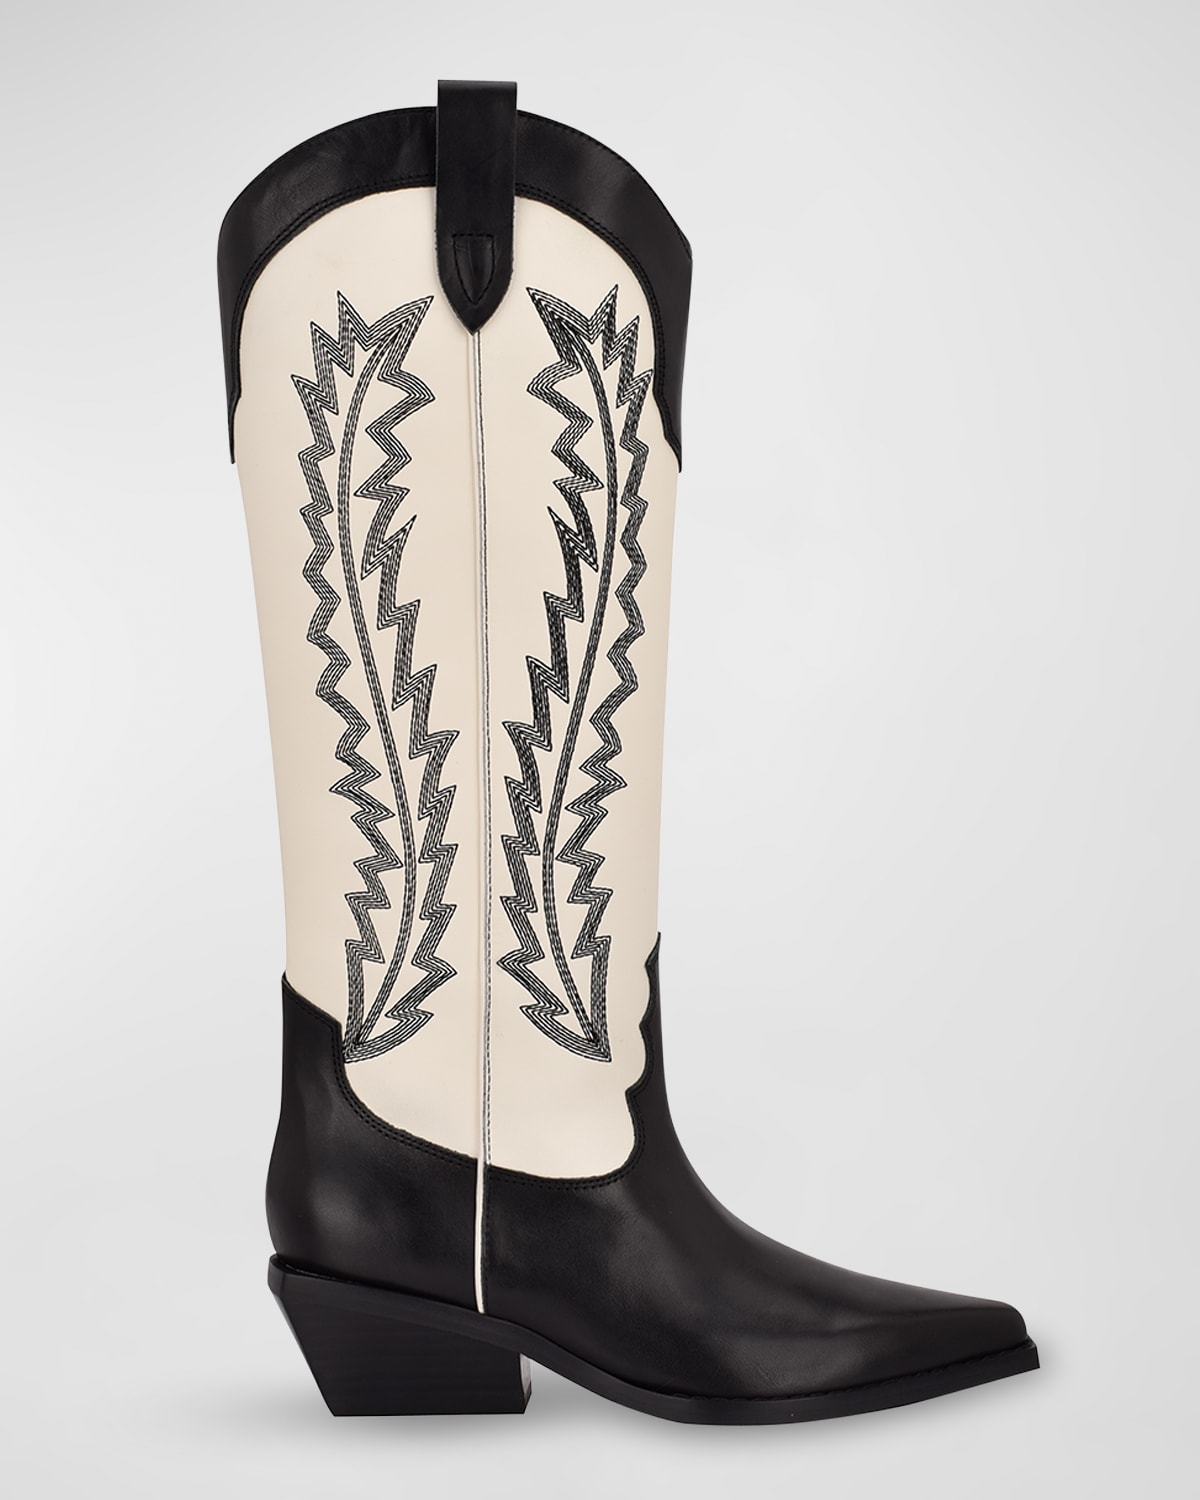 MARC FISHER LTD ROSELLE EMBROIDERED WESTERN BOOTS